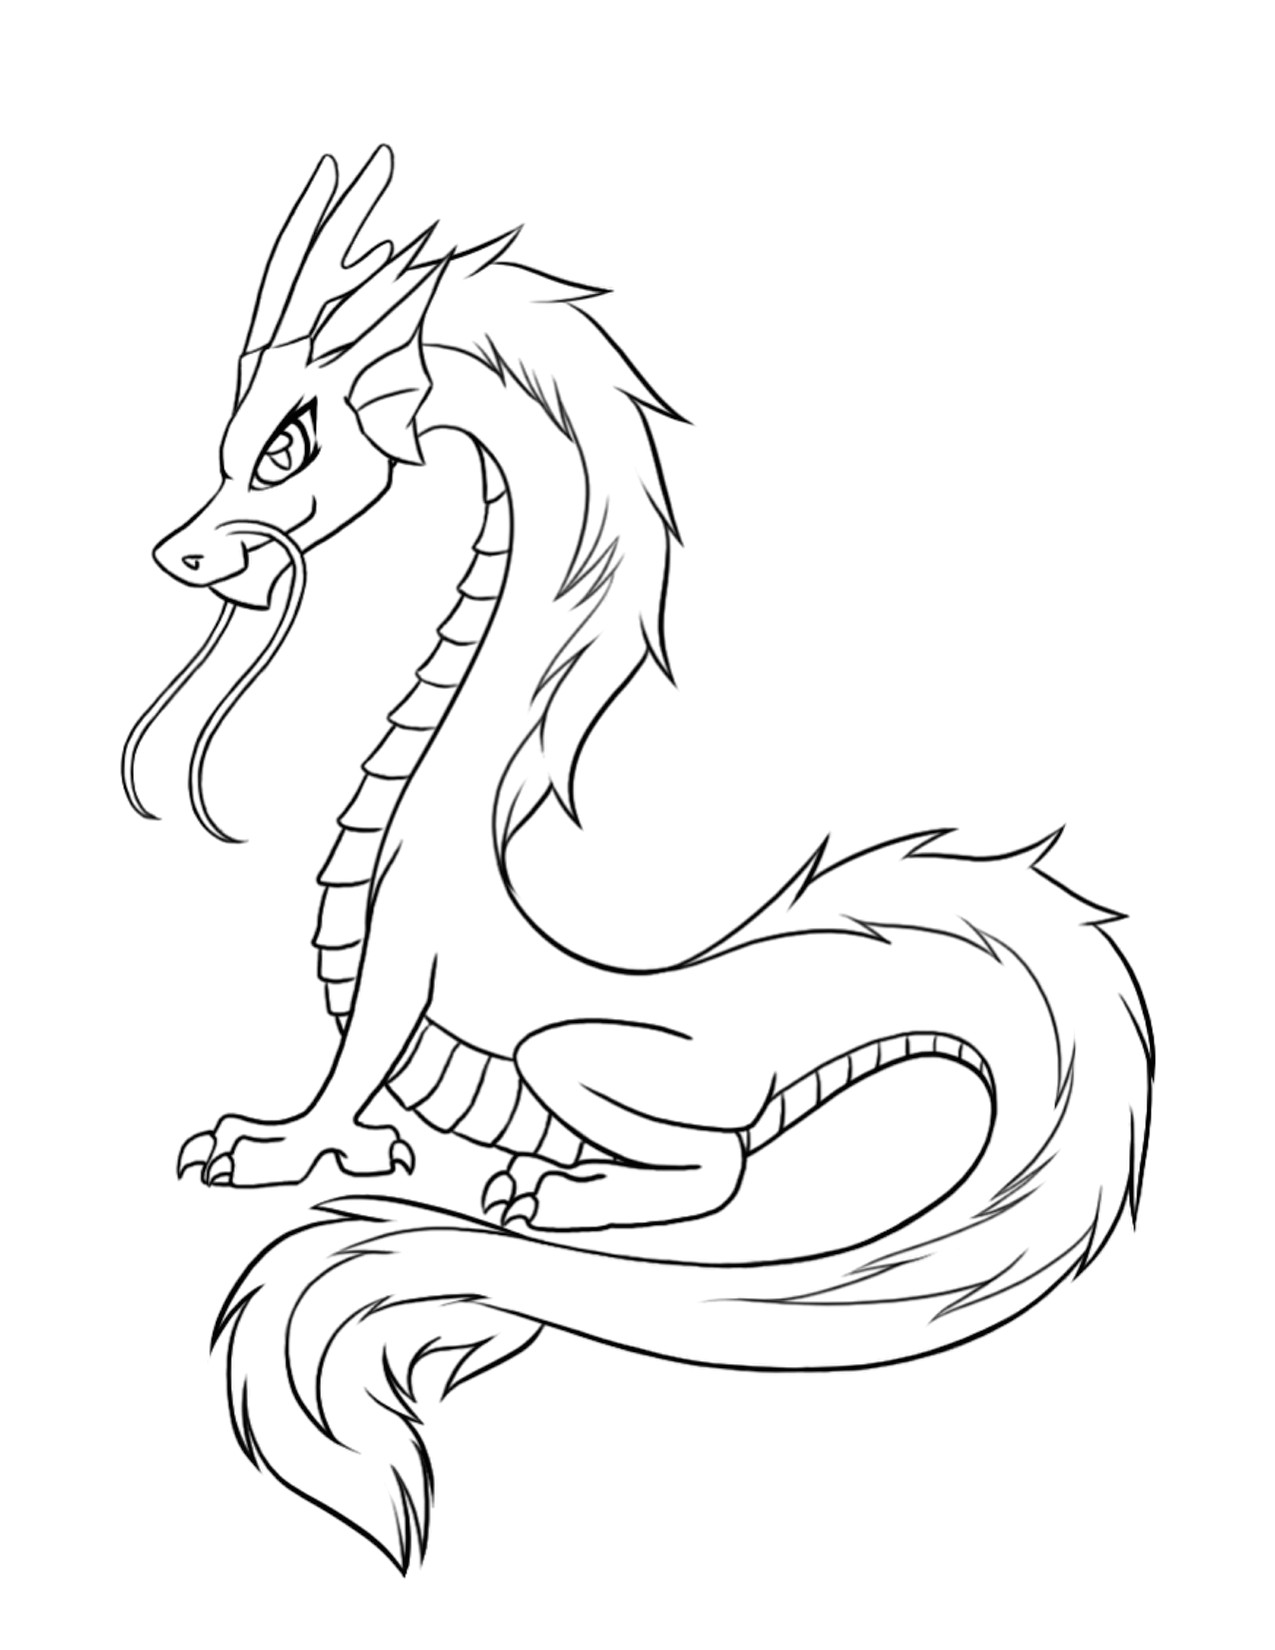 Line Drawings Of Chinese Dragons Free Printable Dragon Coloring Pages for Kids Dragon Sketch